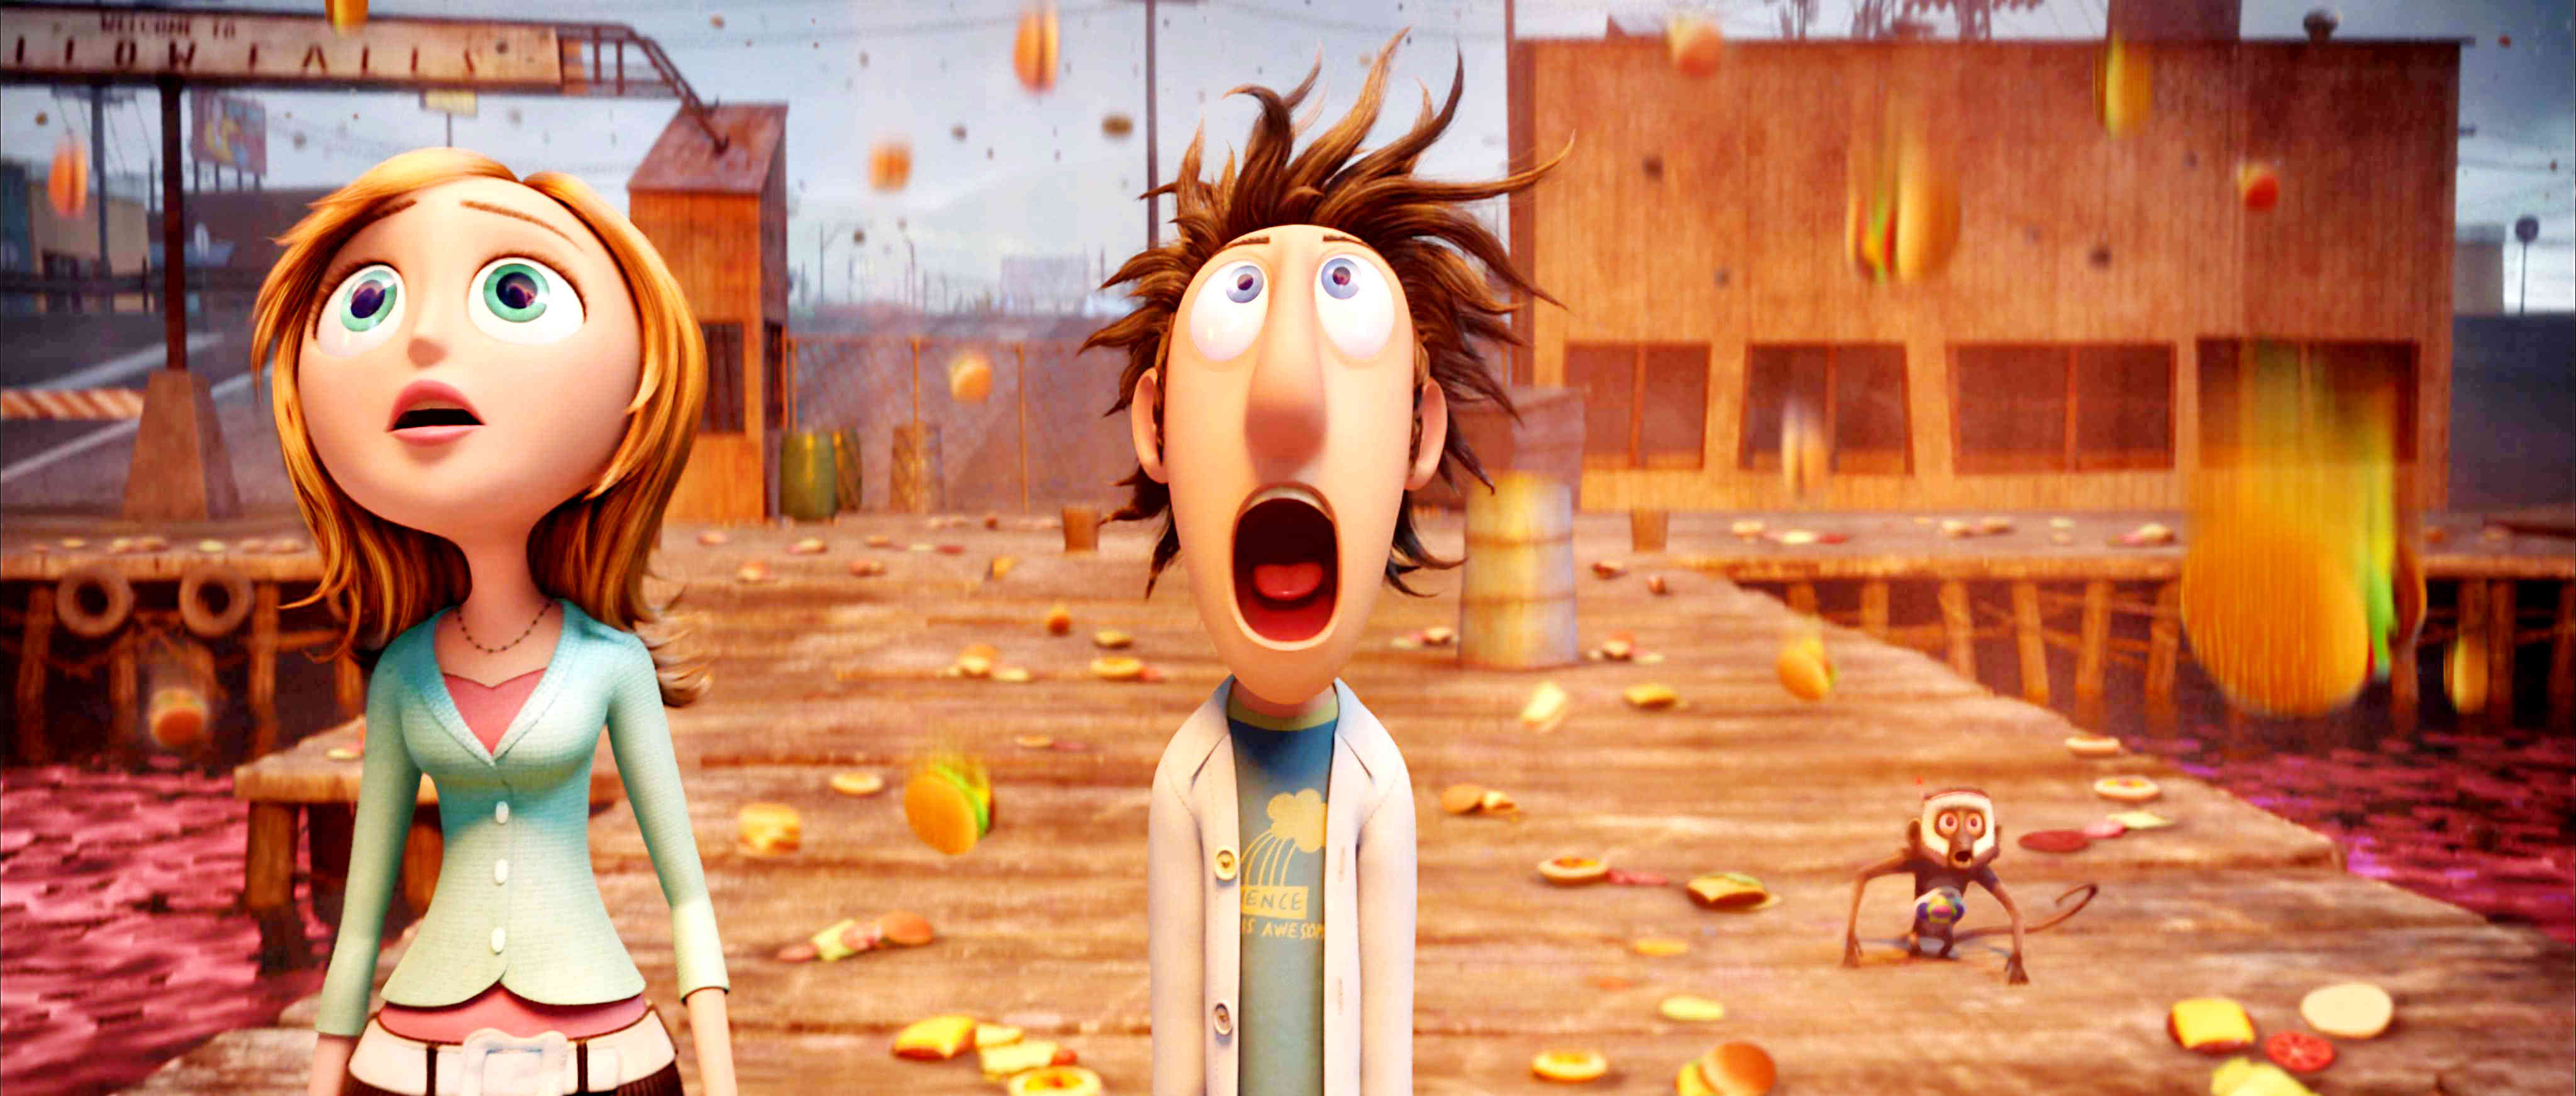 Top HD Cloudy With A Chance Of Meatballs Wallpapers.